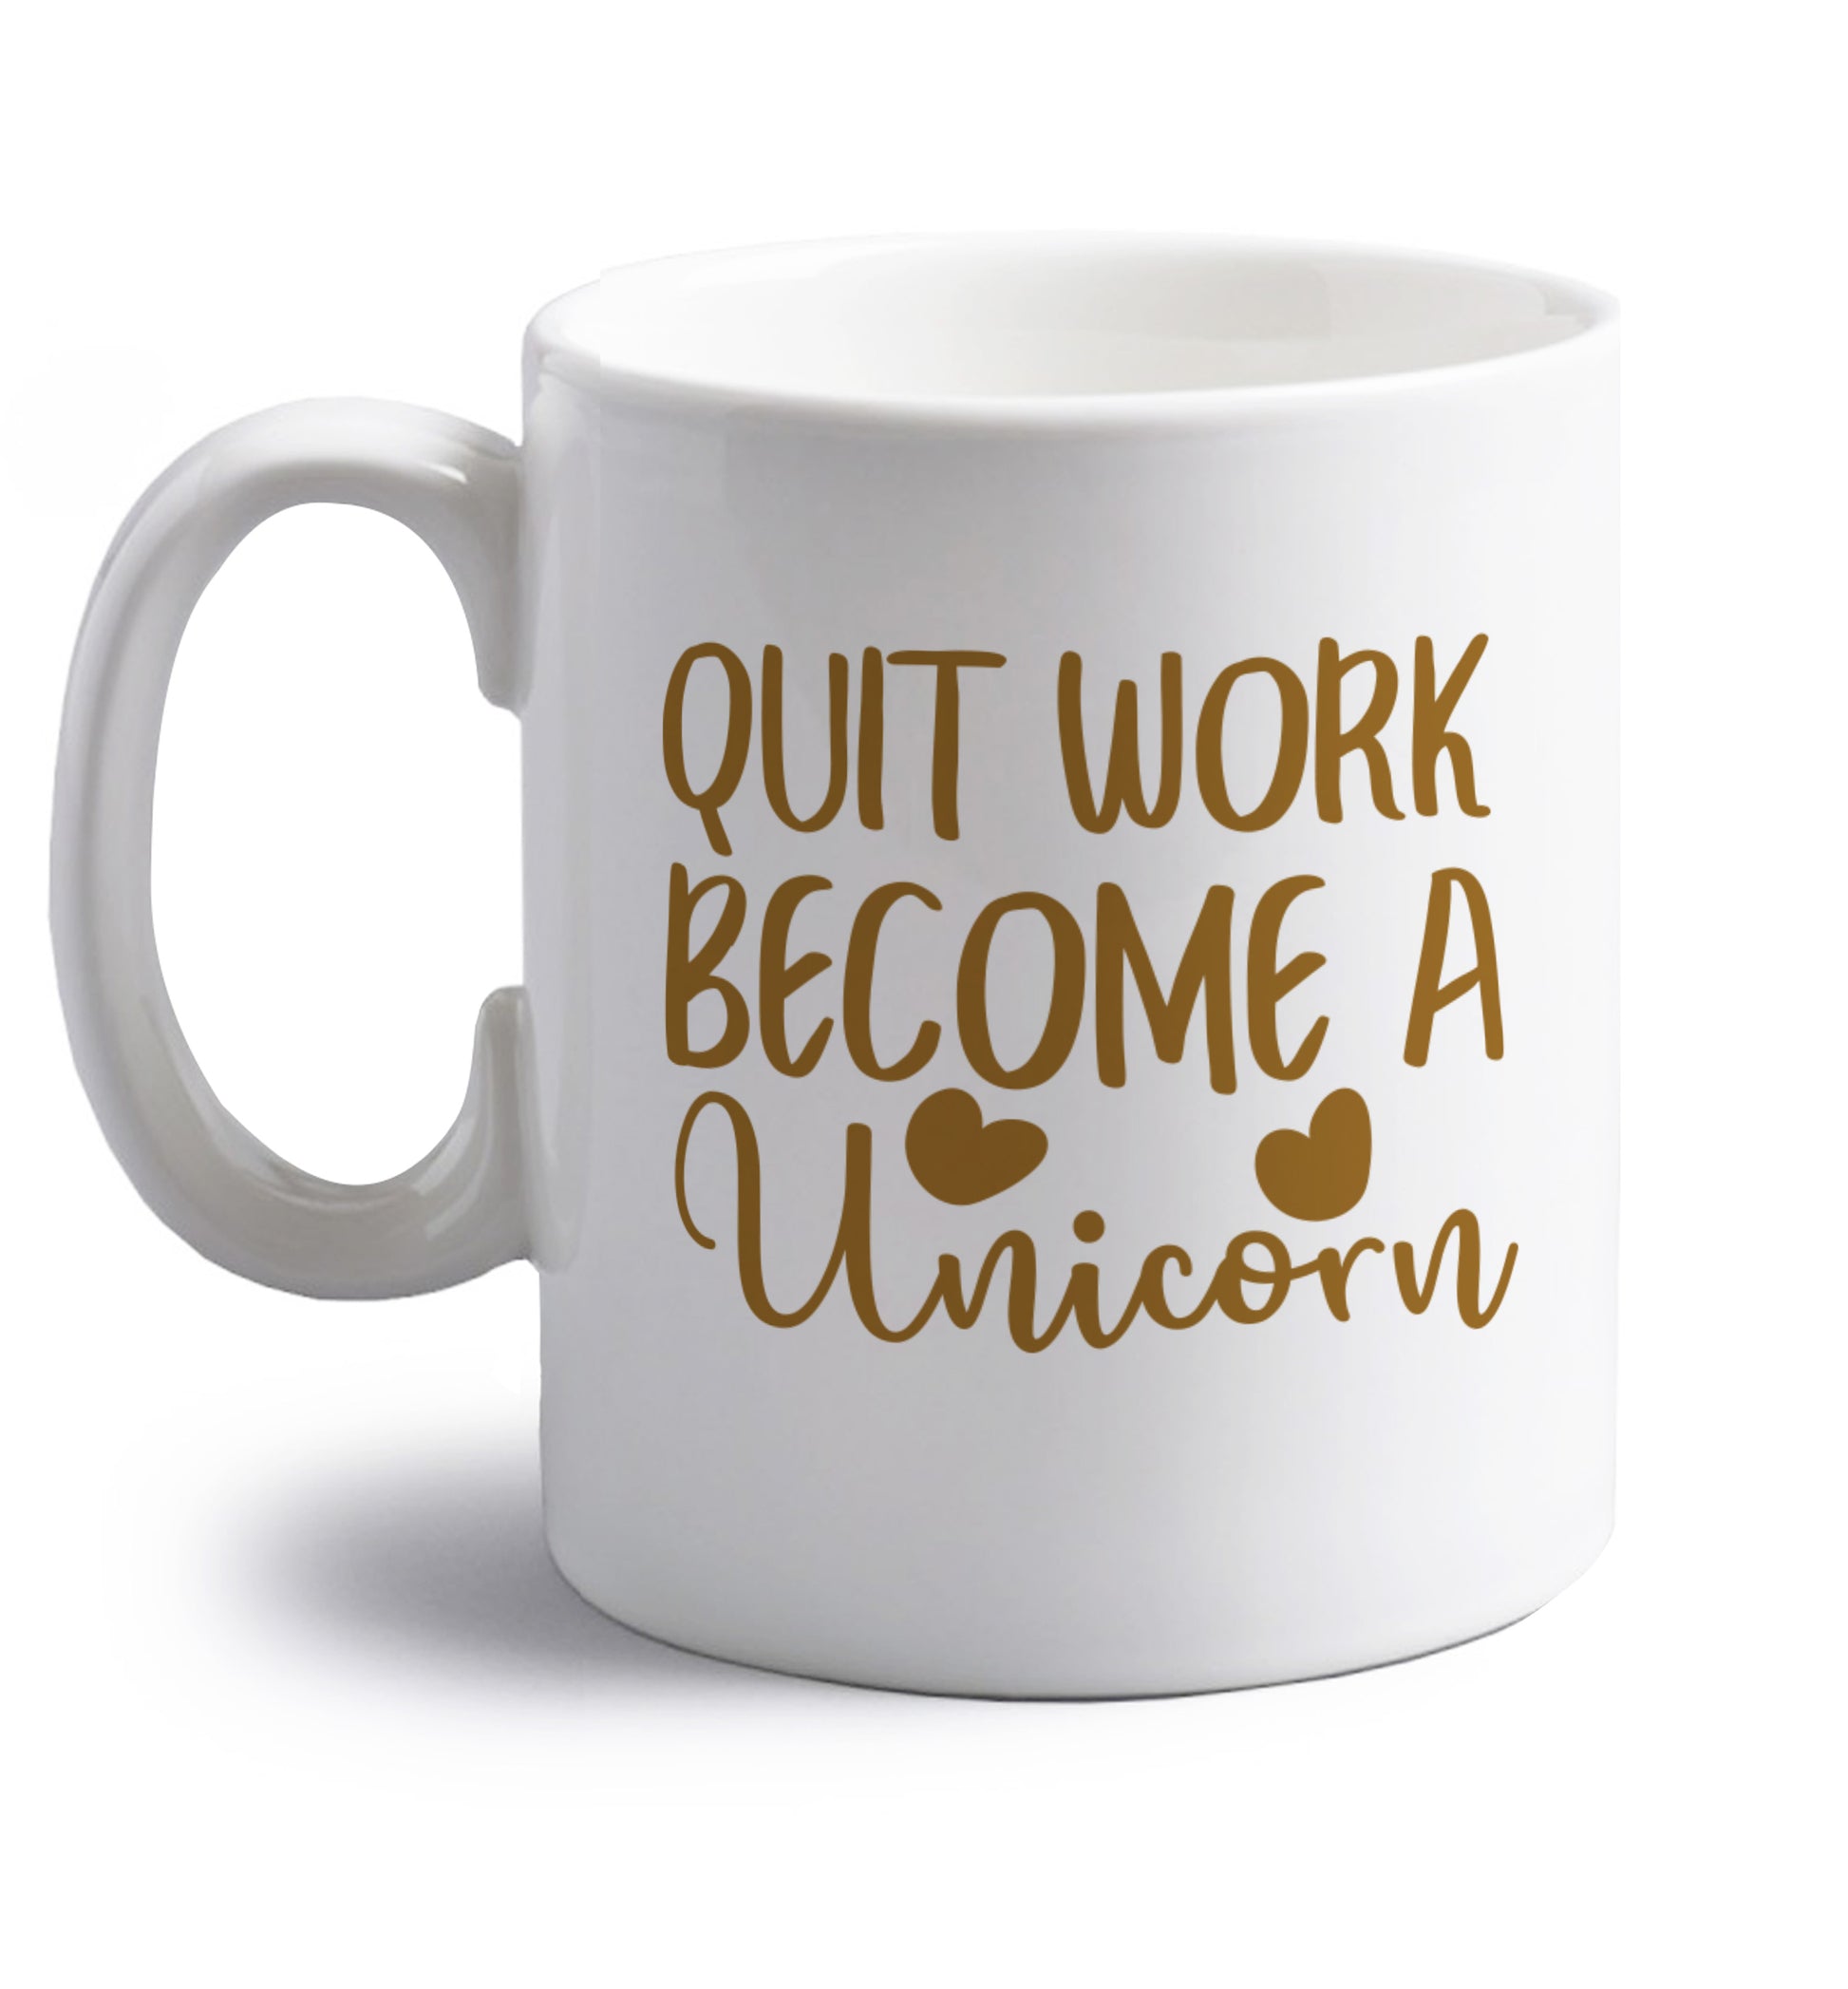 Quit work become a unicorn right handed white ceramic mug 